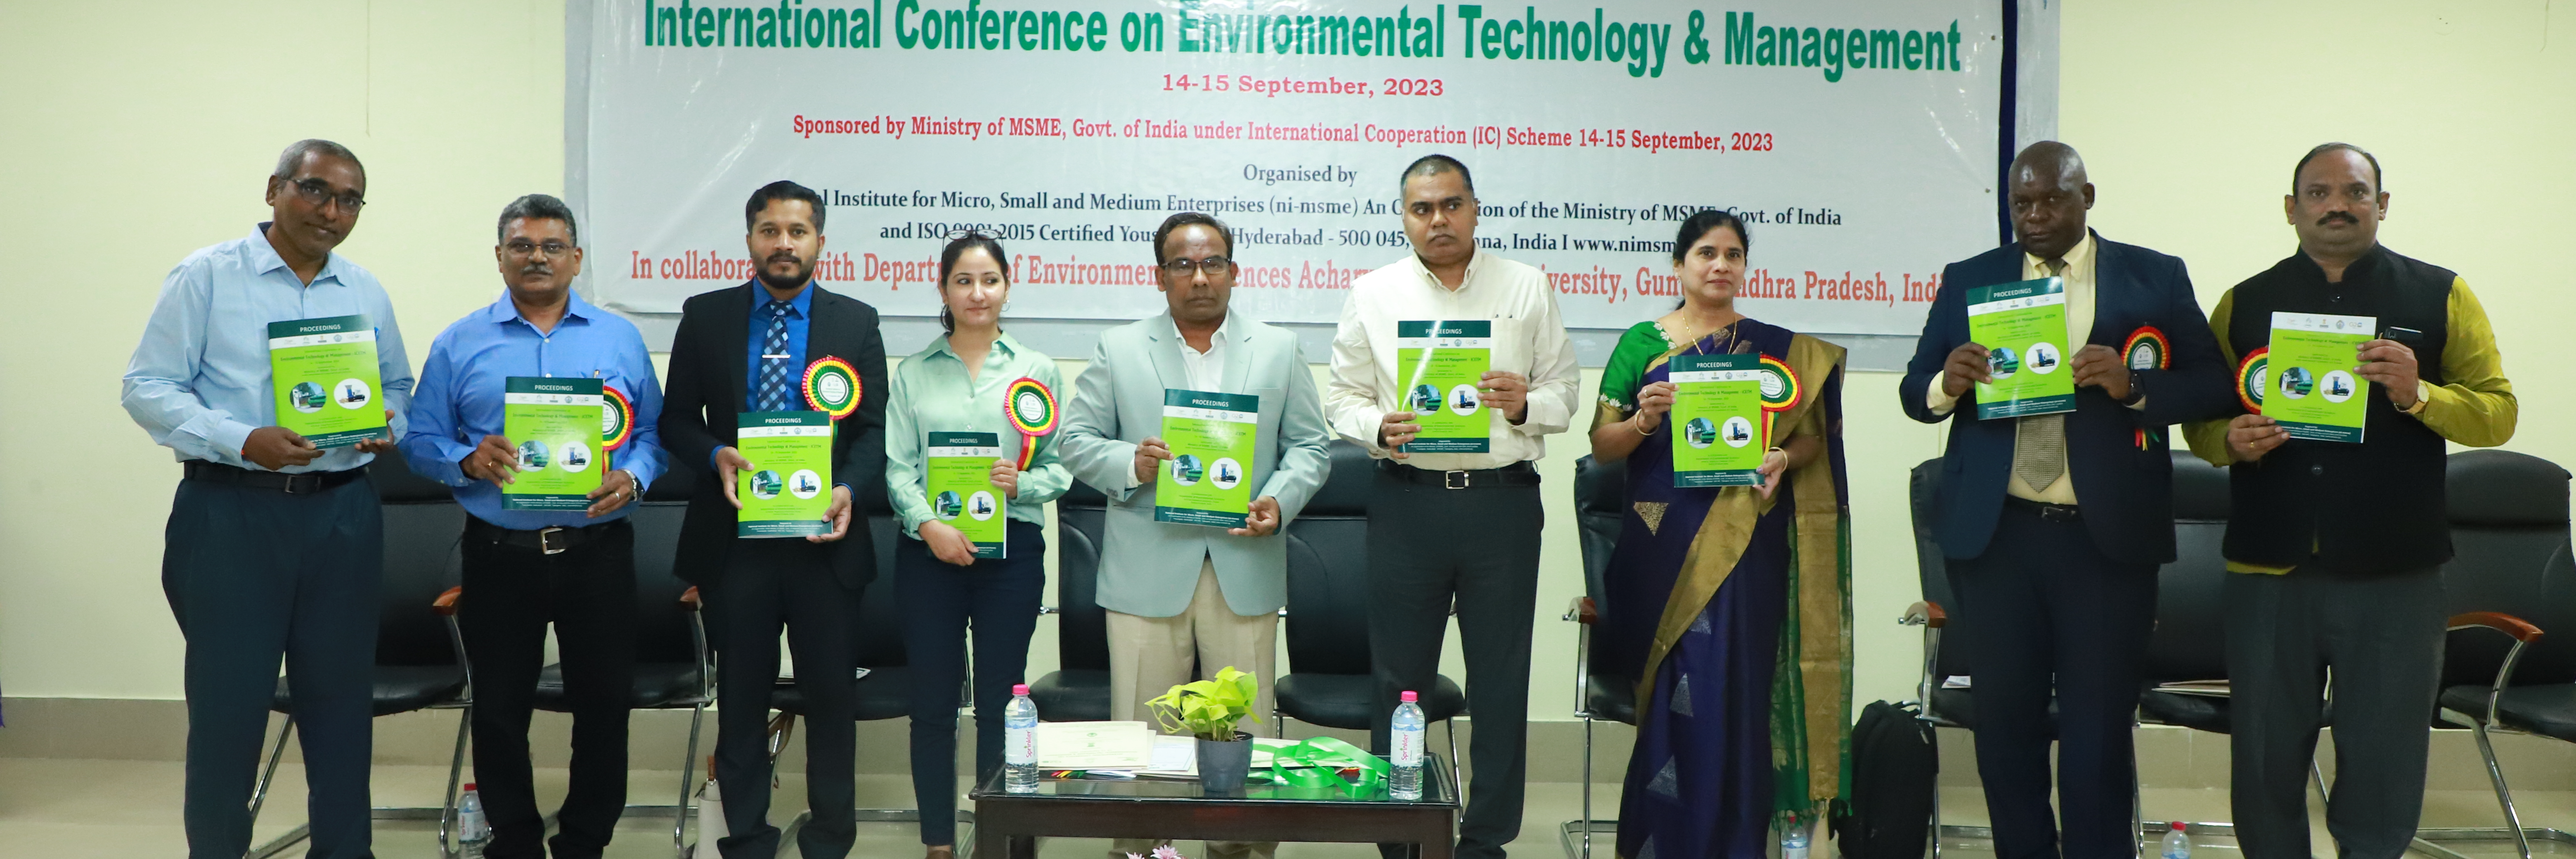 International Conference on Environmental Technology & Management 